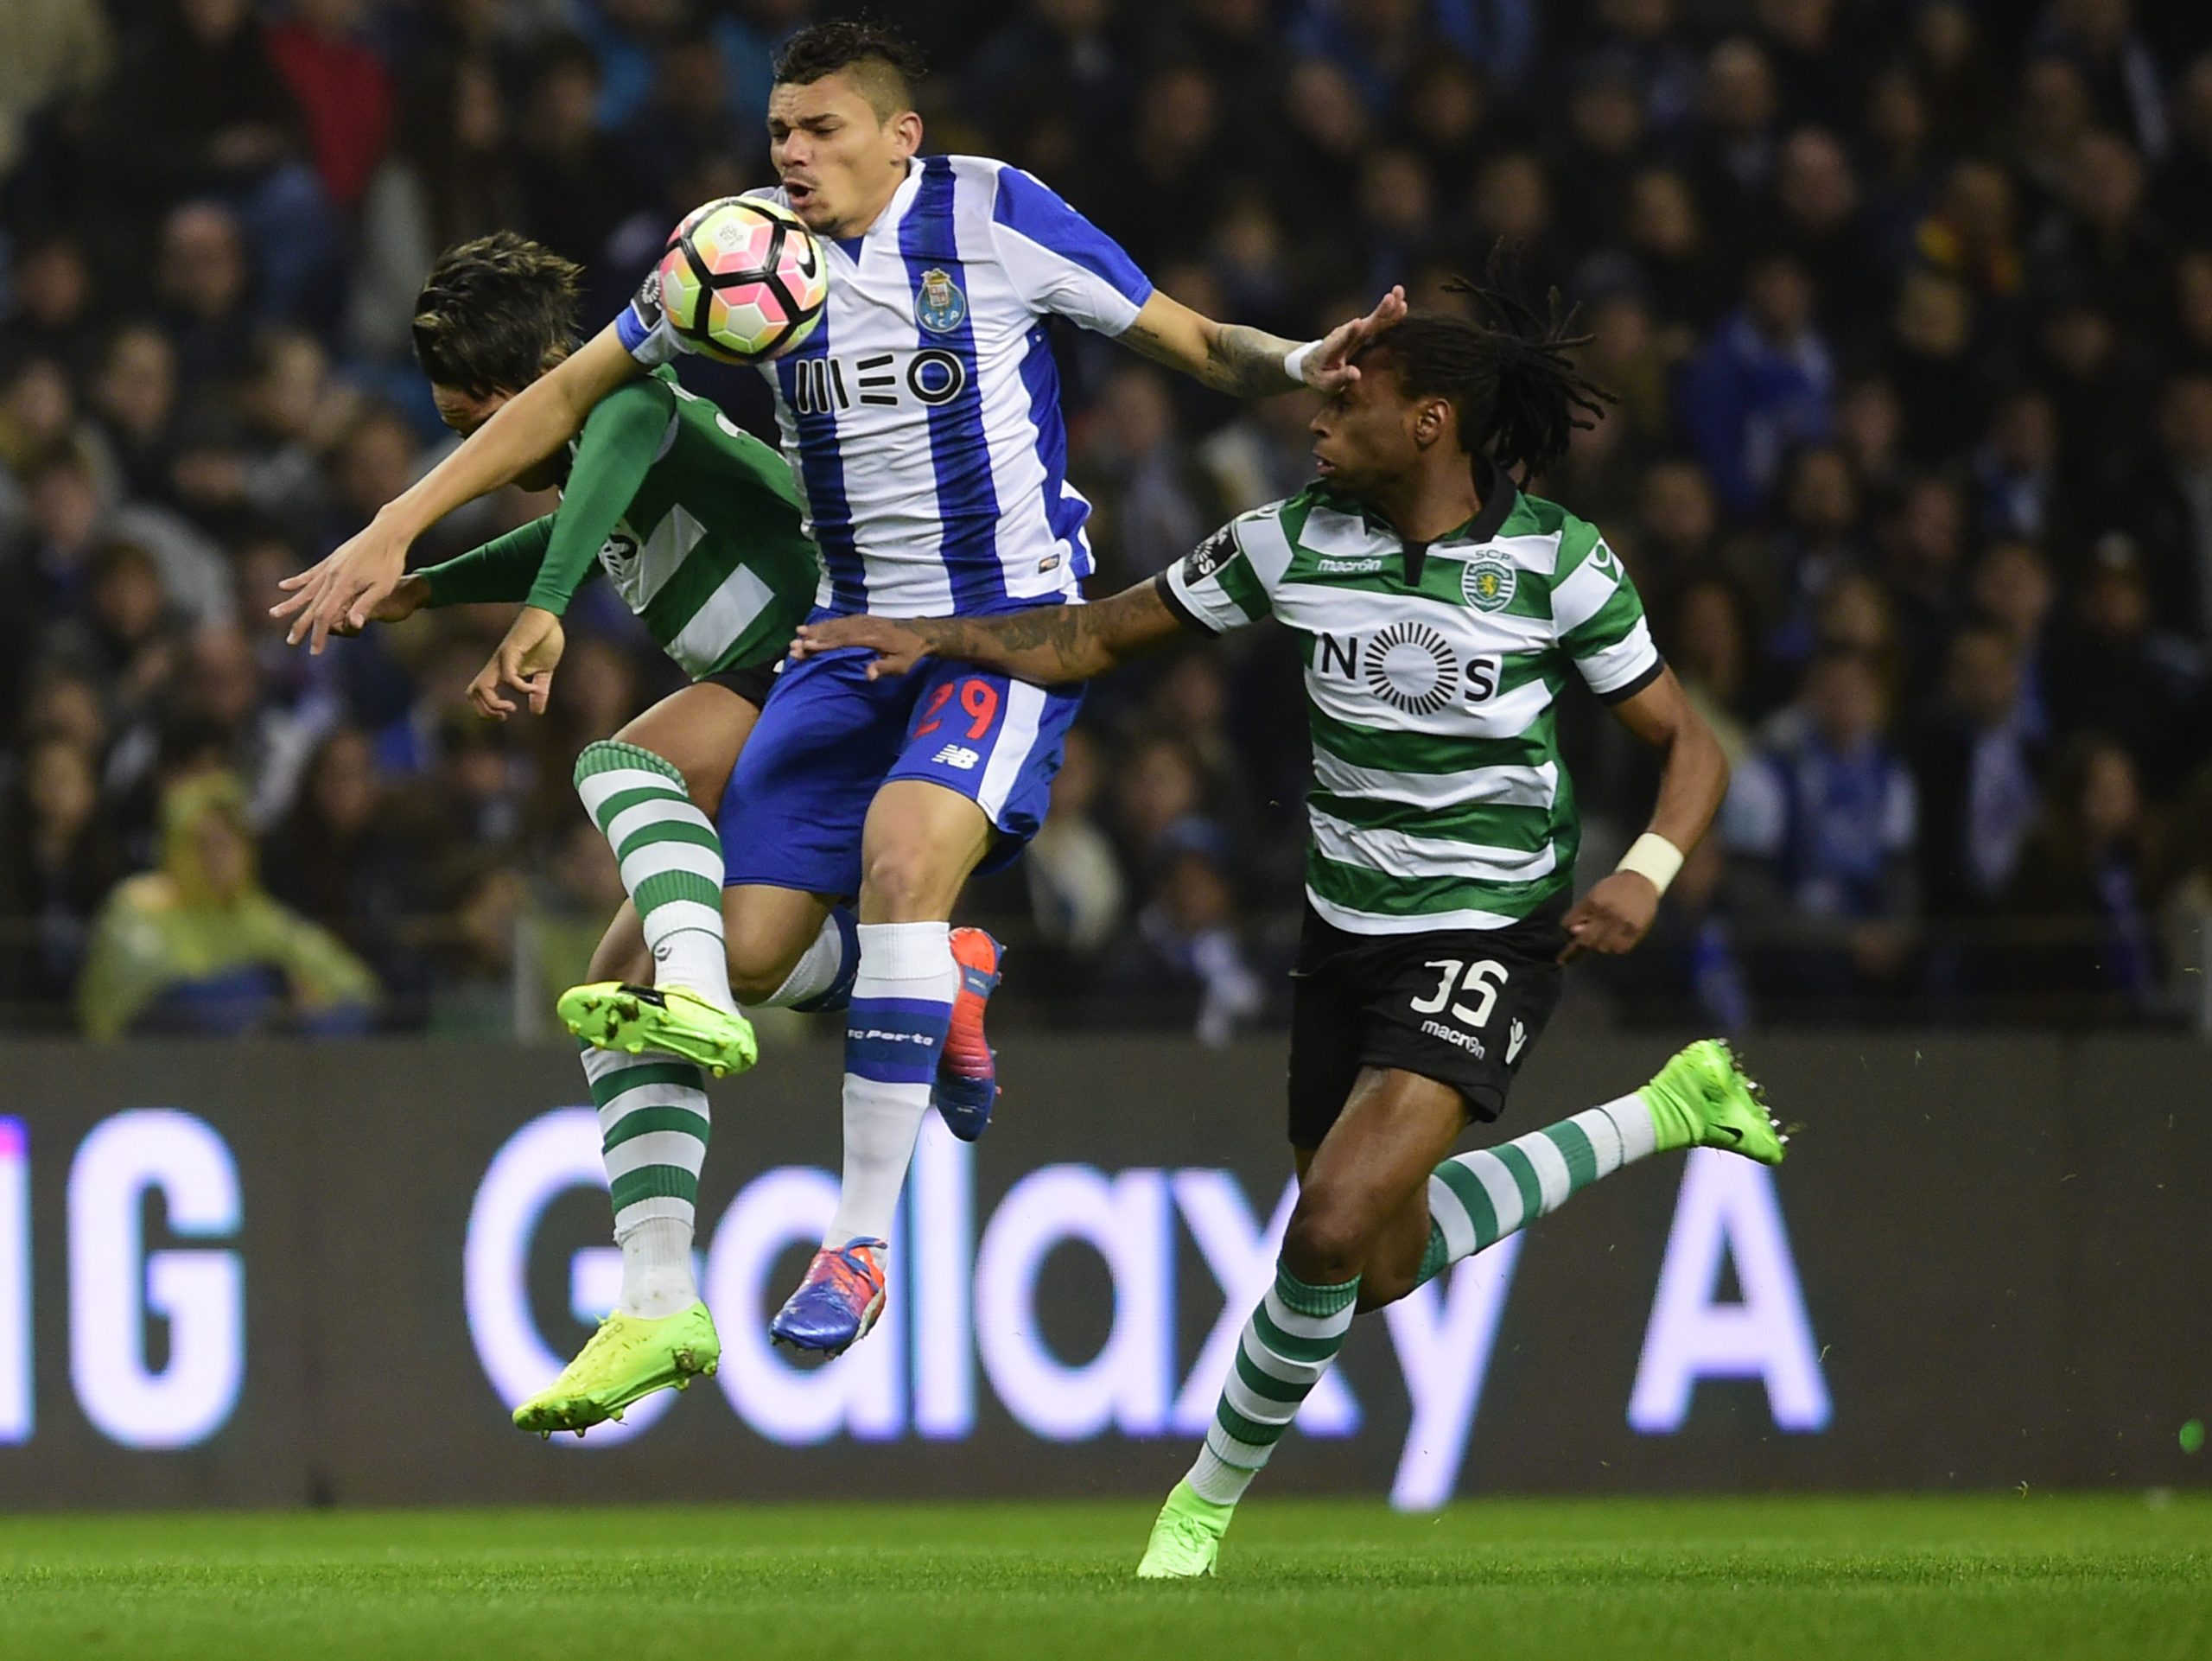 Porto's Brazilian forward Soares (C) vies with Sporting's Dutch defender Marvin Zeegelaar (L) and Sporting's defender Ruben Semedo during the Portuguese league football match FC Porto vs Sporting CP at the Dragao stadium in Porto on February 4, 2017. / AFP / MIGUEL RIOPA        (Photo credit should read MIGUEL RIOPA/AFP/Getty Images)